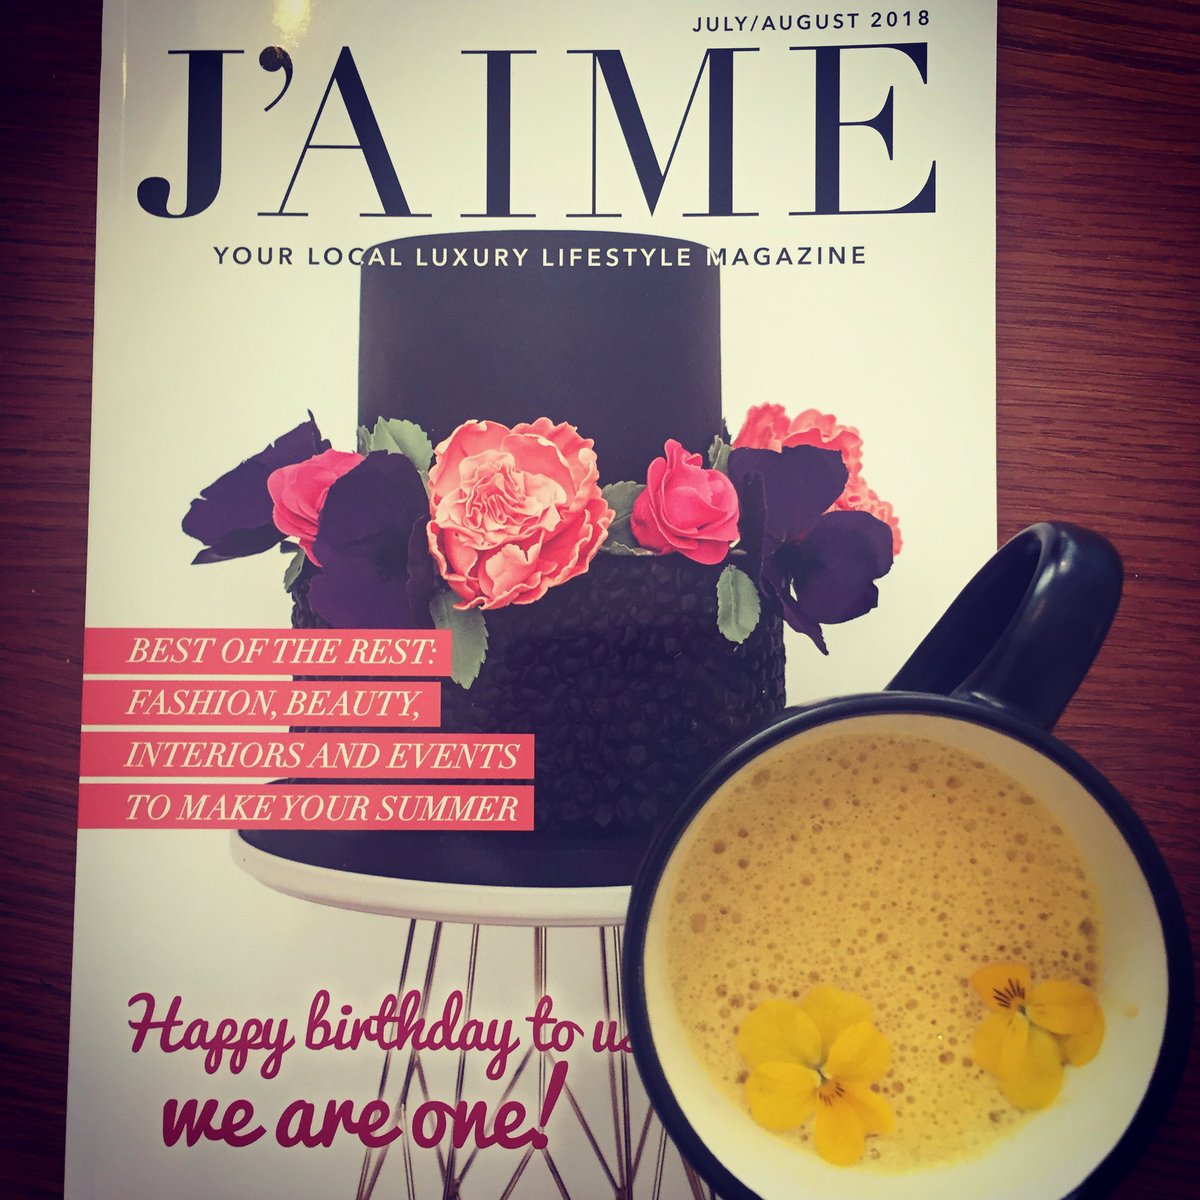 Wonderful to meet Amy from @jaimemagazine this week. Happy 1st Birthday 🎉 and thank you for introducing us to @melbsinlich and their addictive turmeric lattes ☕️ #Jaime #LichfieldBusiness #LichfieldMarketing #marketingconsultant